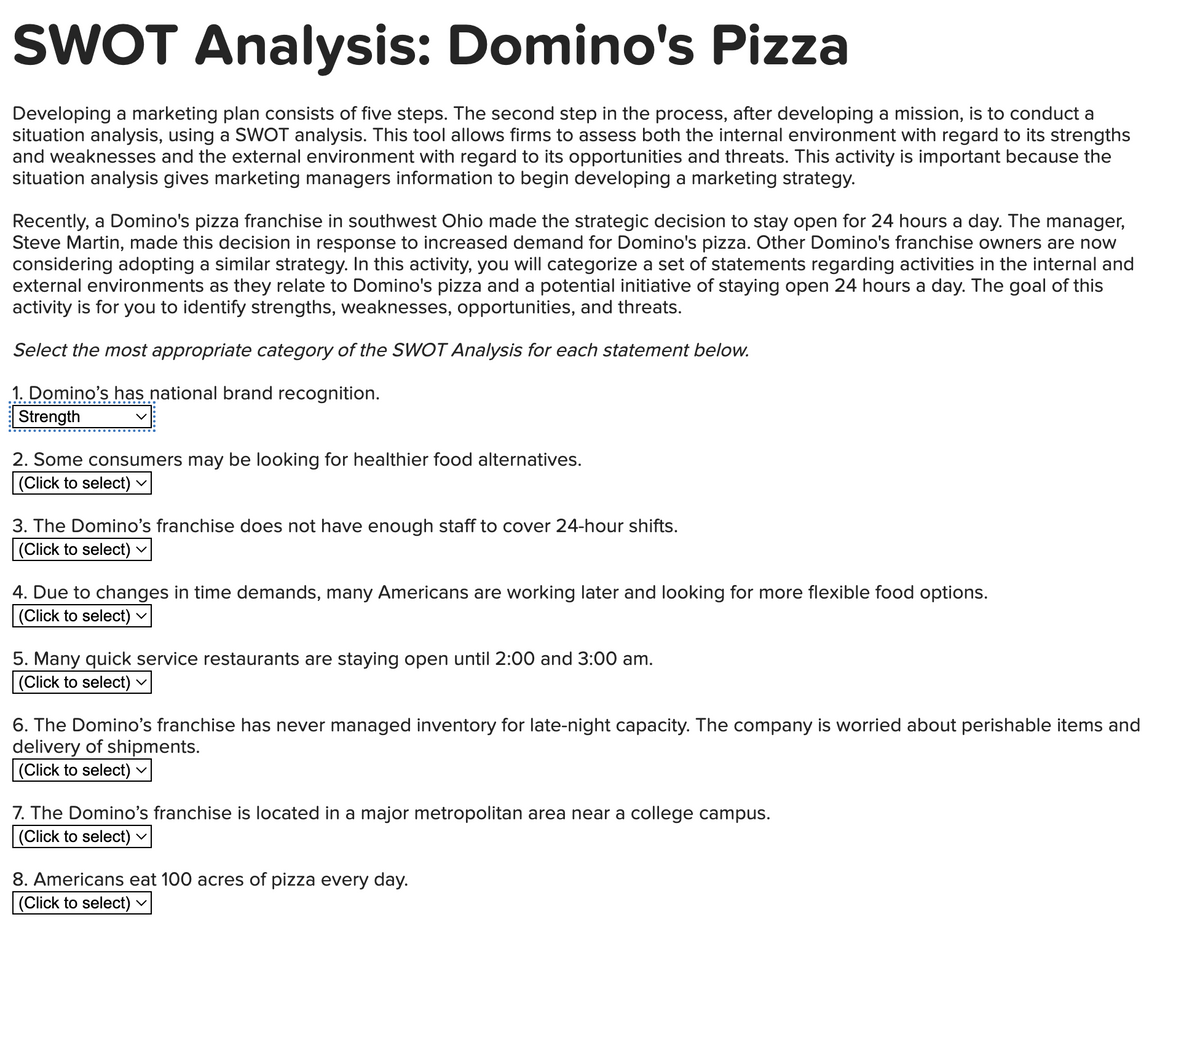 SWOT Analysis: Domino's Pizza
Developing a marketing plan consists of five steps. The second step in the process, after developing a mission, is to conduct a
situation analysis, using a SWOT analysis. This tool allows firms to assess both the internal environment with regard to its strengths
and weaknesses and the external environment with regard to its opportunities and threats. This activity is important because the
situation analysis gives marketing managers information to begin developing a marketing strategy.
Recently, a Domino's pizza franchise in southwest Ohio made the strategic decision to stay open for 24 hours a day. The manager,
Steve Martin, made this decision in response to increased demand for Domino's pizza. Other Domino's franchise owners are now
considering adopting a similar strategy. In this activity, you will categorize a set of statements regarding activities in the internal and
external environments as they relate to Domino's pizza and a potential initiative of staying open 24 hours a day. The goal of this
activity is for you to identify strengths, weaknesses, opportunities, and threats.
Select the most appropriate category of the SWOT Analysis for each statement below.
1. Domino's has national brand recognition.
Strength
2. Some consumers may be looking for healthier food alternatives.
(Click to select)
3. The Domino's franchise does not have enough staff to cover 24-hour shifts.
(Click to select) ✓
4. Due to changes in time demands, many Americans are working later and looking for more flexible food options.
(Click to select) V
5. Many quick service restaurants are staying open until 2:00 and 3:00 am.
(Click to select)
6. The Domino's franchise has never managed inventory for late-night capacity. The company is worried about perishable items and
delivery of shipments.
(Click to select)
7. The Domino's franchise is located in a major metropolitan area near a college campus.
(Click to select)
8. Americans eat 100 acres of pizza every day.
(Click to select)